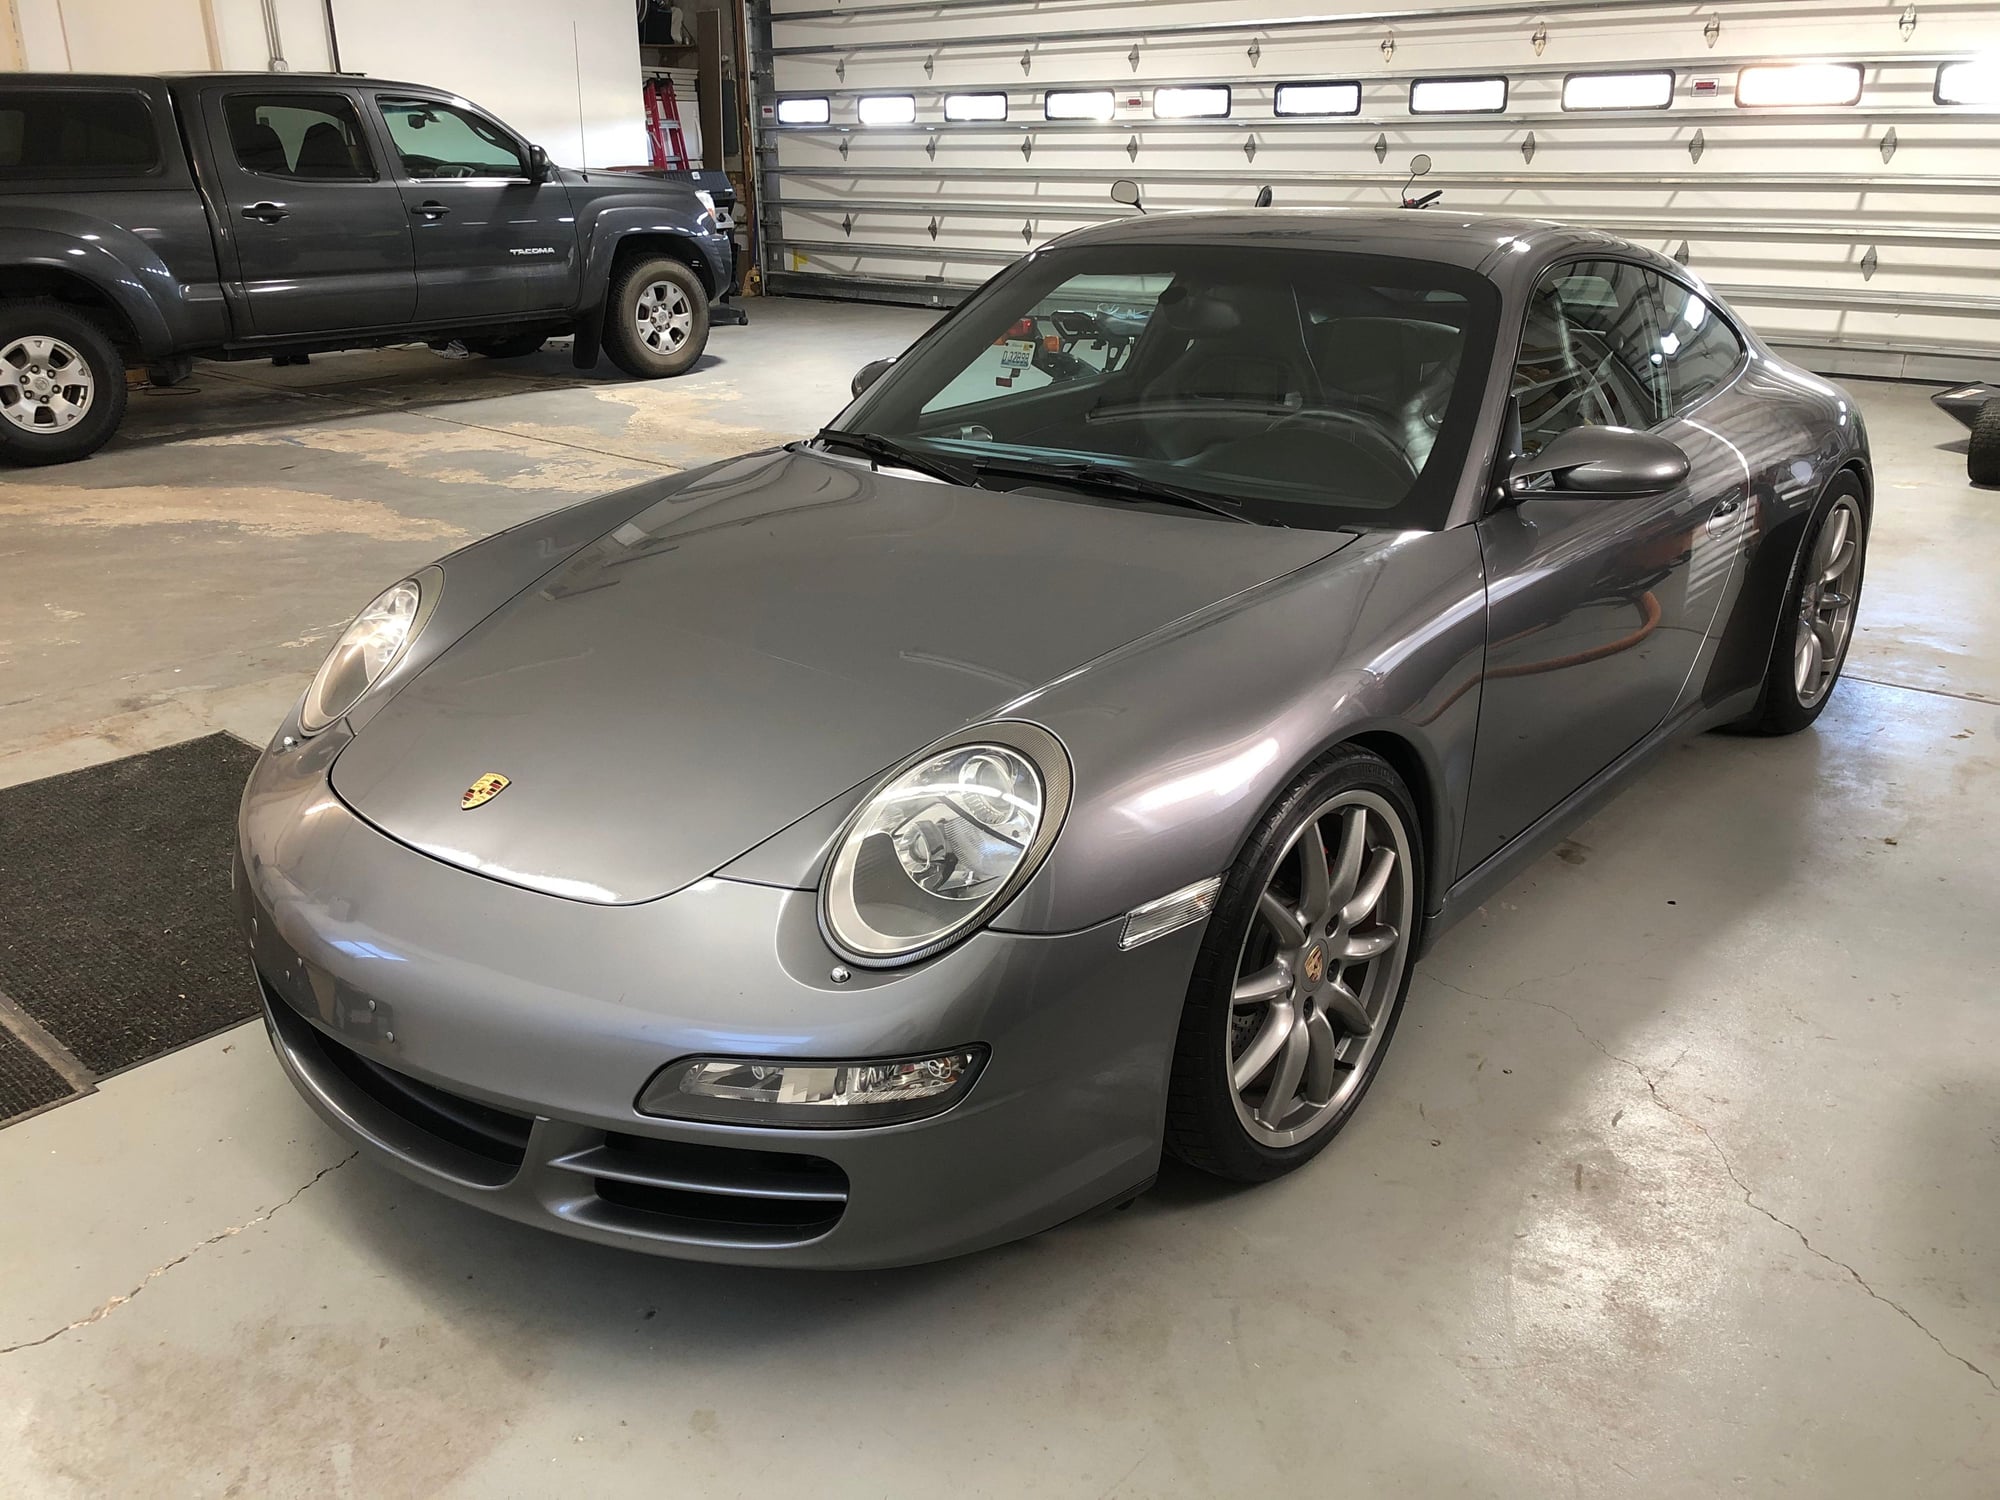 2006 Porsche 911 - 2006 Carrera S Seal Grey - Used - VIN WP0AB29976S742288 - 88,918 Miles - 6 cyl - 2WD - Manual - Coupe - Gray - Downers Grove, IL 60516, United States